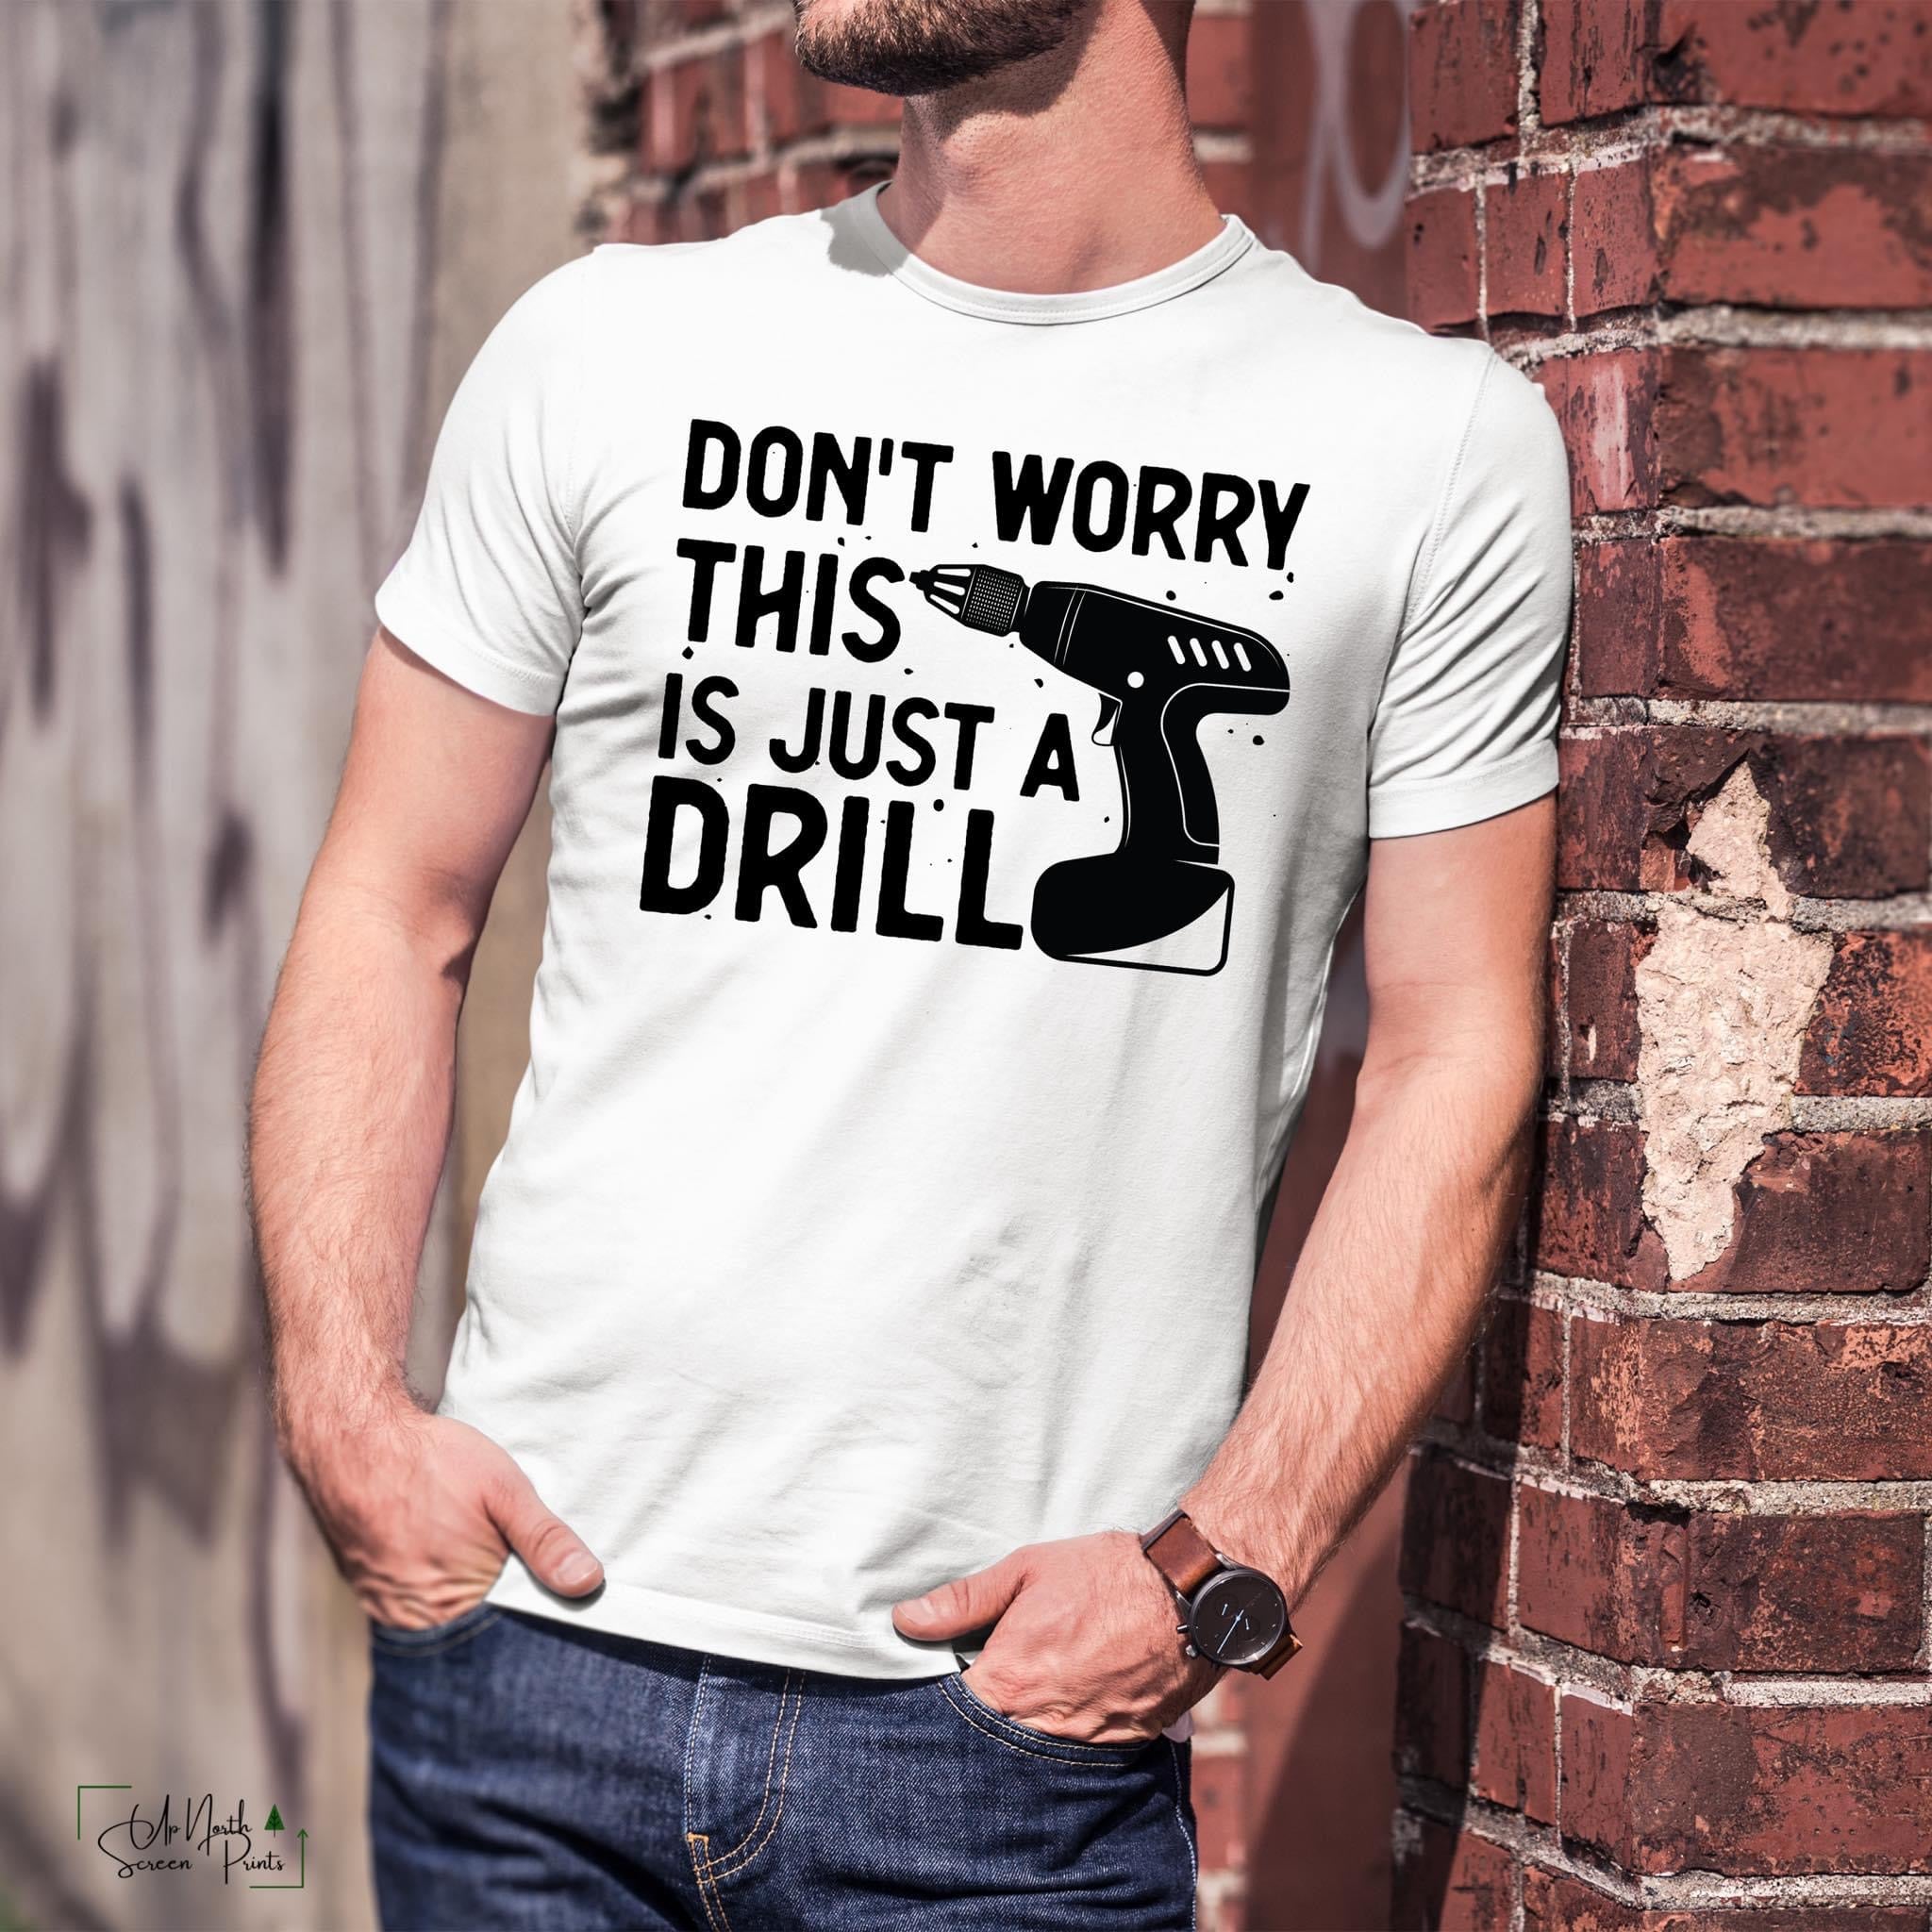 This is Just a Drill